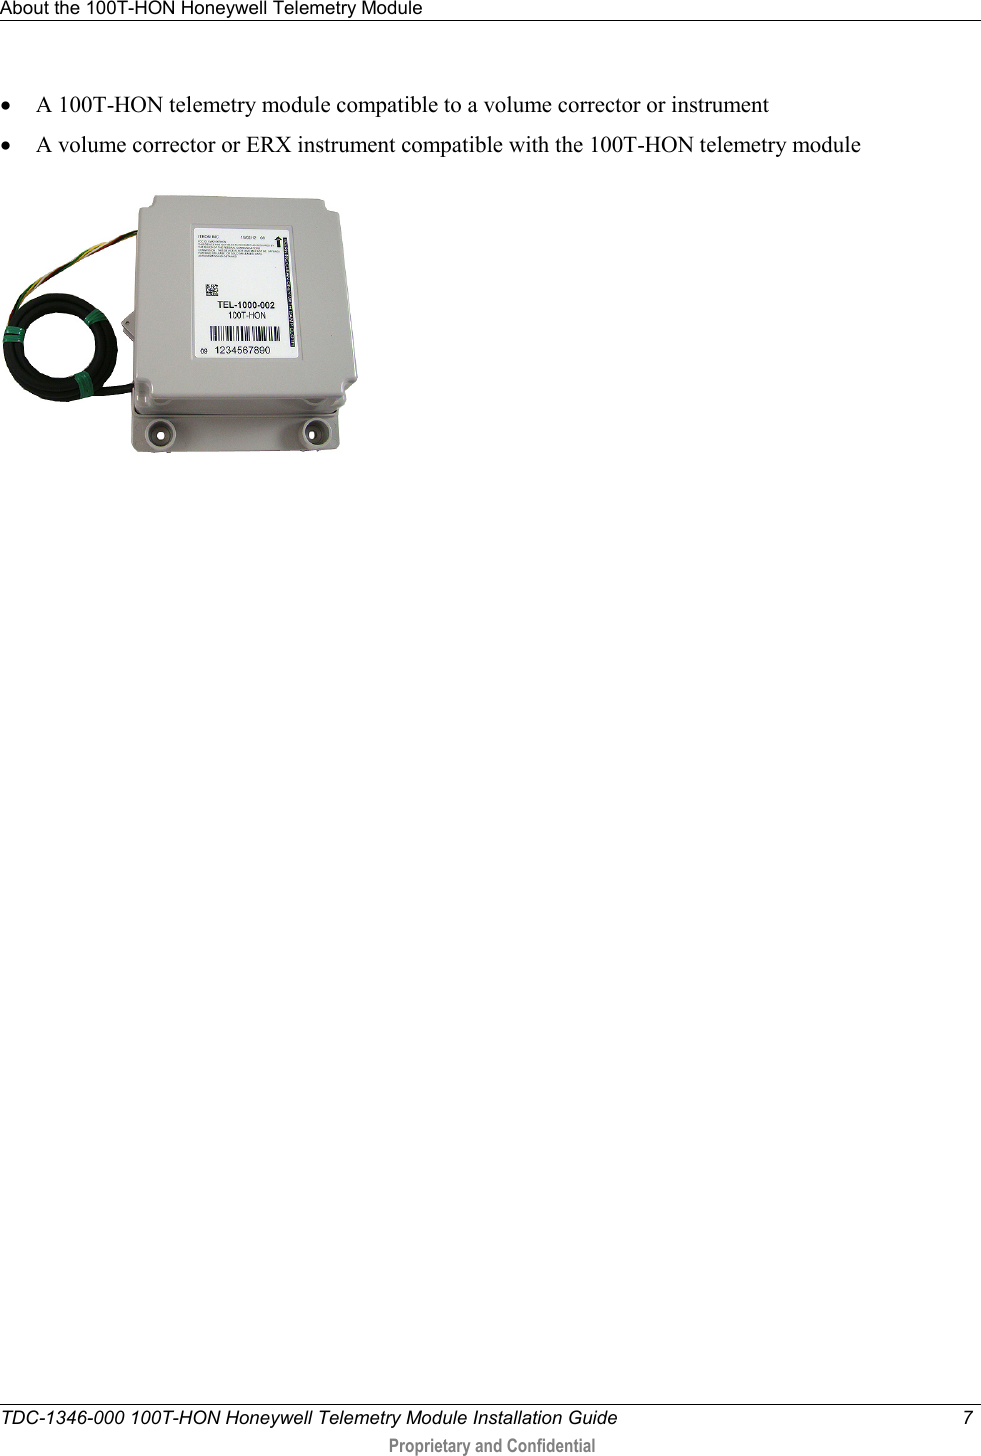 About the 100T-HON Honeywell Telemetry Module   TDC-1346-000 100T-HON Honeywell Telemetry Module Installation Guide  7   Proprietary and Confidential     • A 100T-HON telemetry module compatible to a volume corrector or instrument • A volume corrector or ERX instrument compatible with the 100T-HON telemetry module   